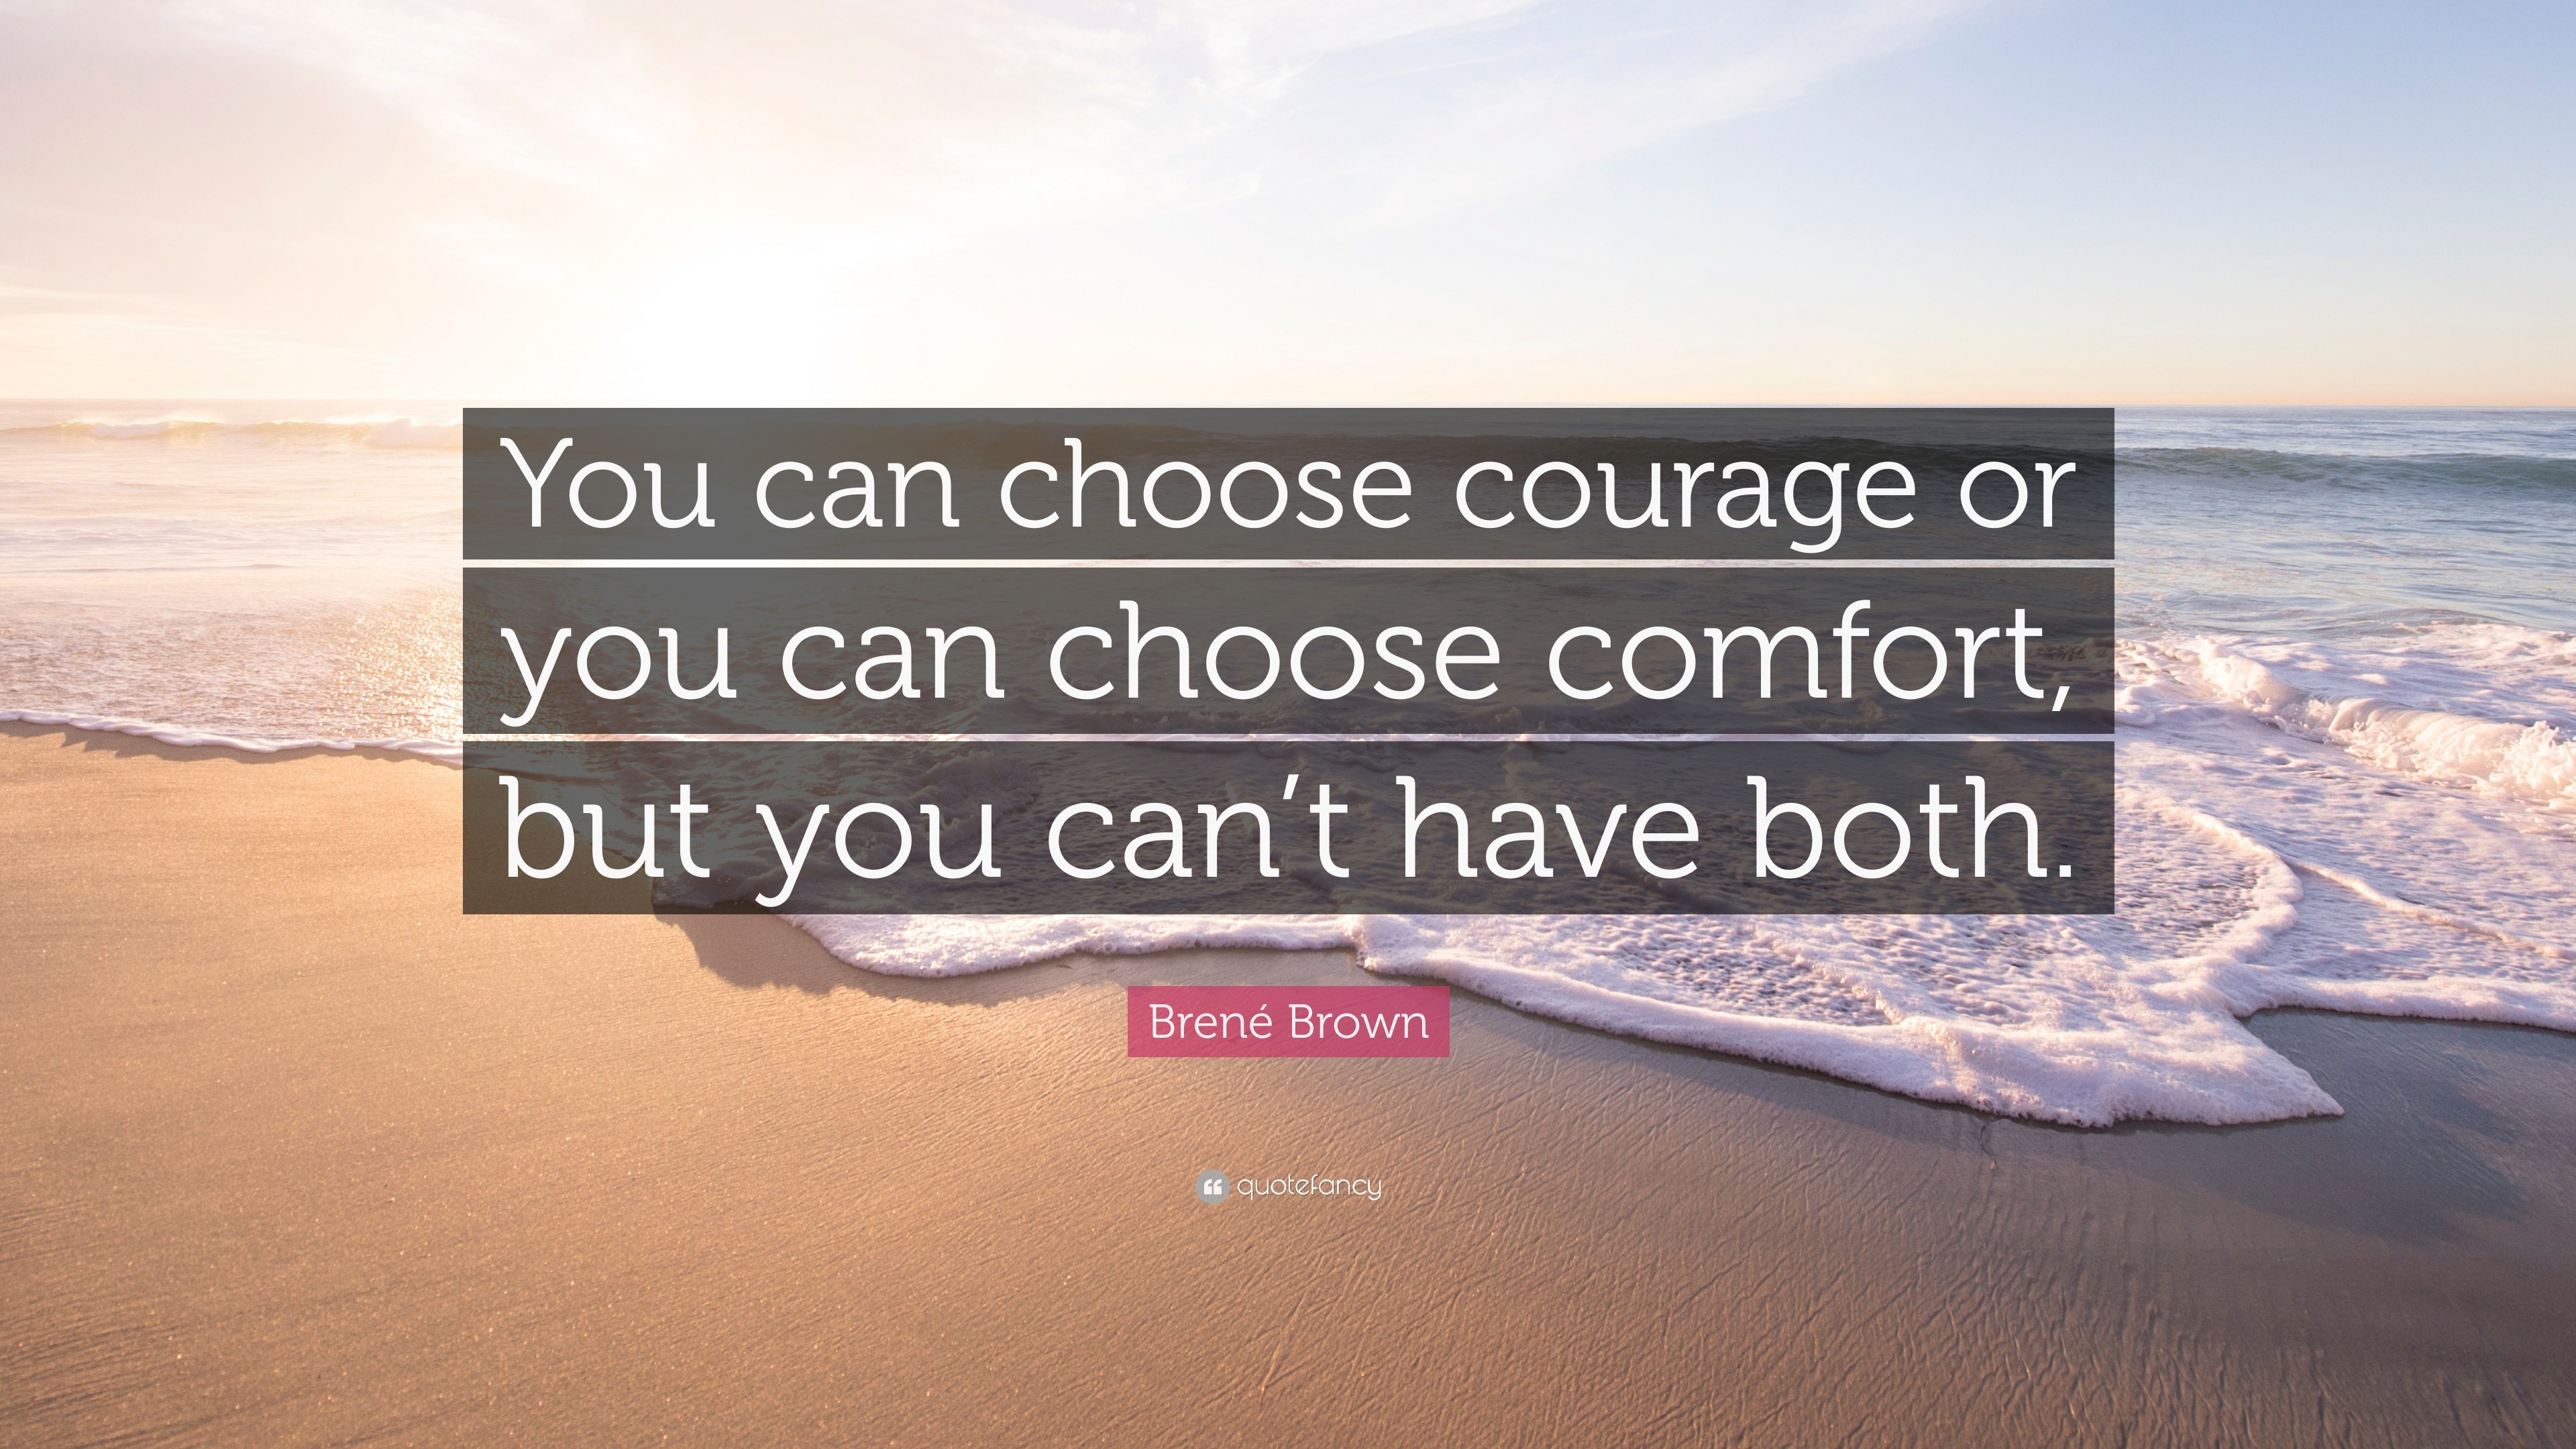 You can choose courage or you can choose comfort, but you can’t have both. 